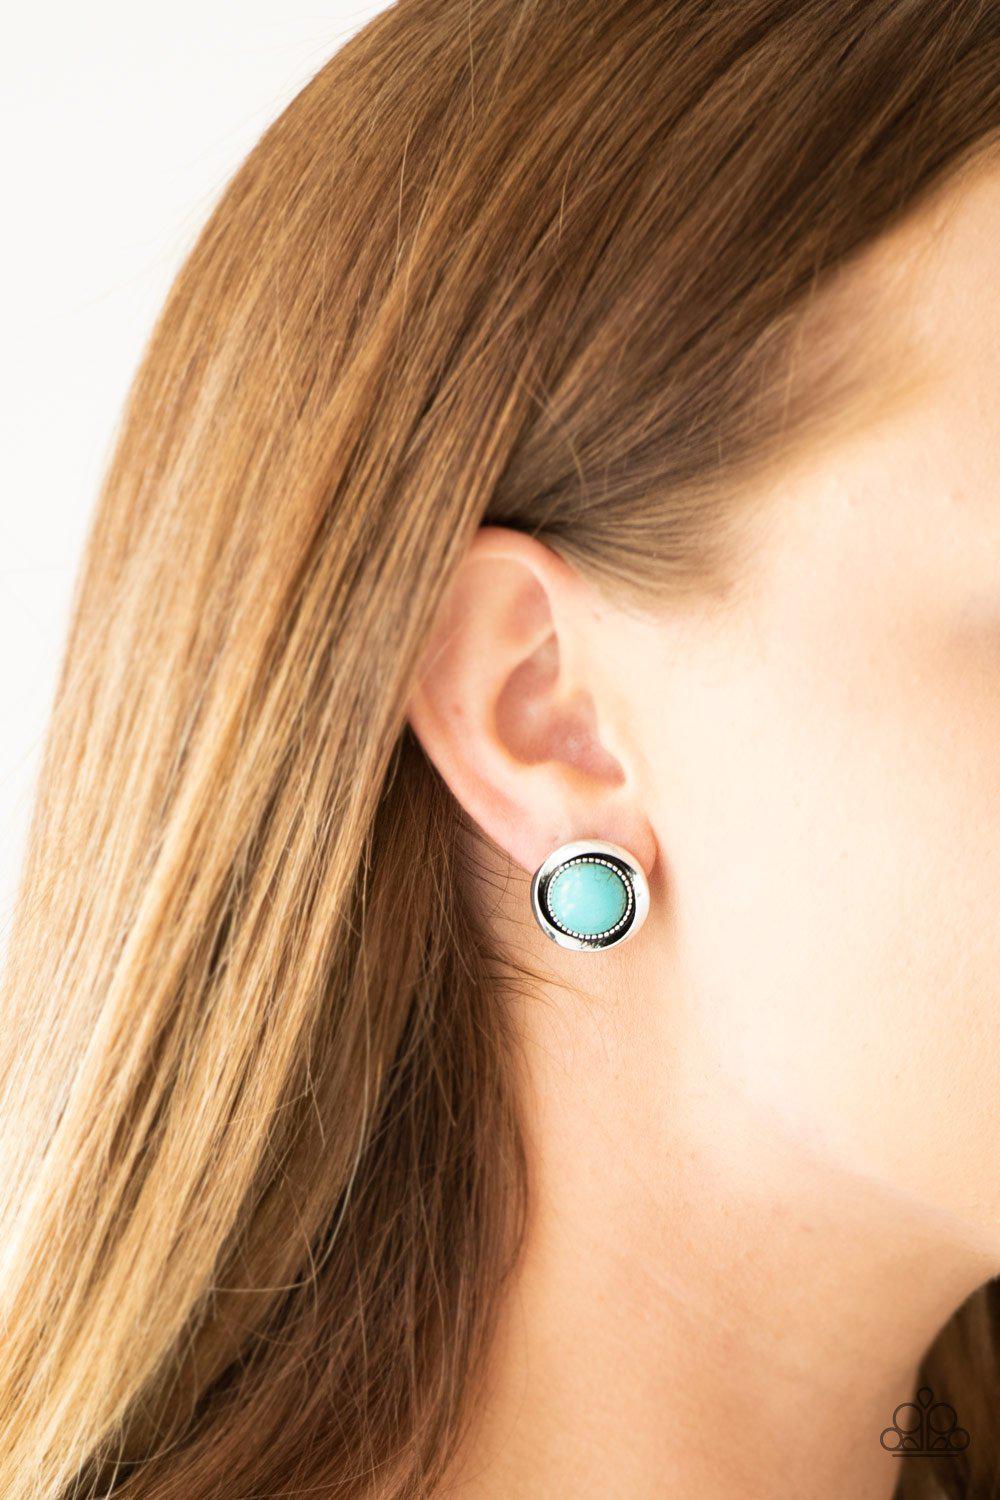 Out Of This Galaxy Turquoise Blue Stone Earrings - Paparazzi Accessories-CarasShop.com - $5 Jewelry by Cara Jewels